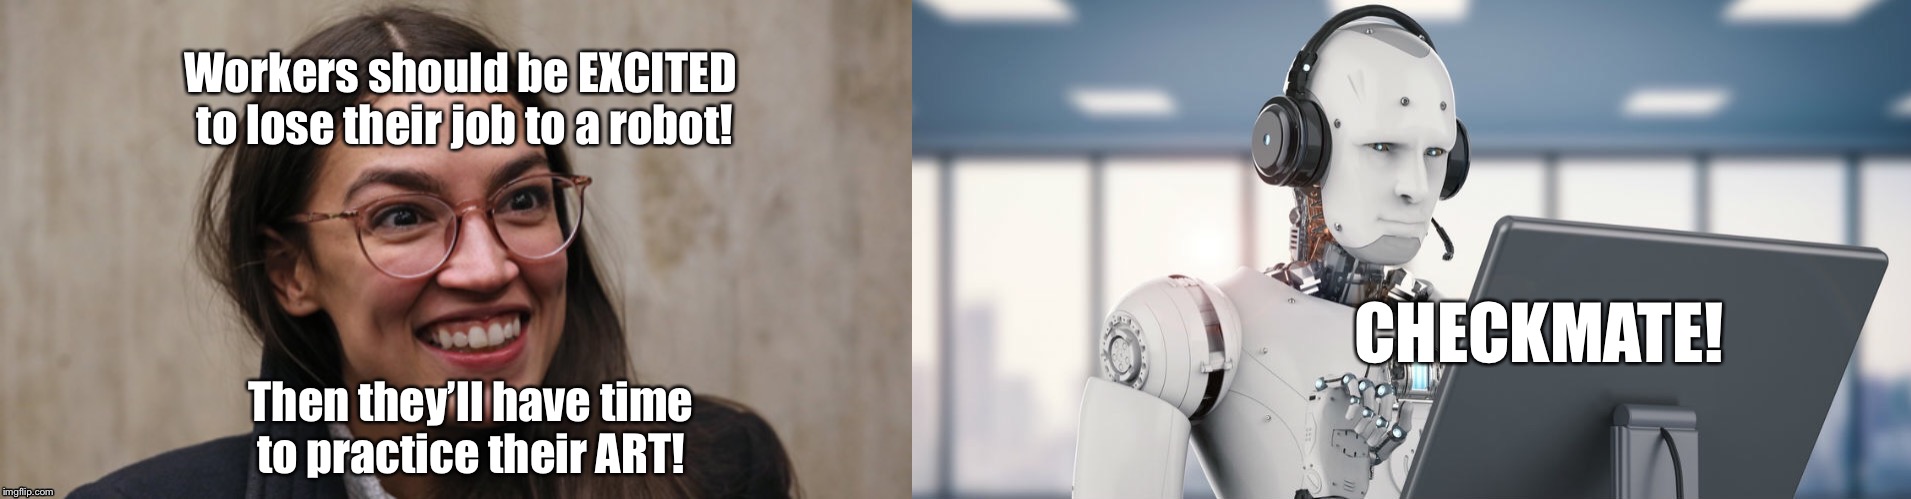 AI vs AOC | Workers should be EXCITED to lose their job to a robot! CHECKMATE! Then they’ll have time to practice their ART! | image tagged in artificial intelligence vs organic stupidity,alexandria ocasio-cortez,crazy alexandria ocasio-cortez,socialism,democrats,robots | made w/ Imgflip meme maker